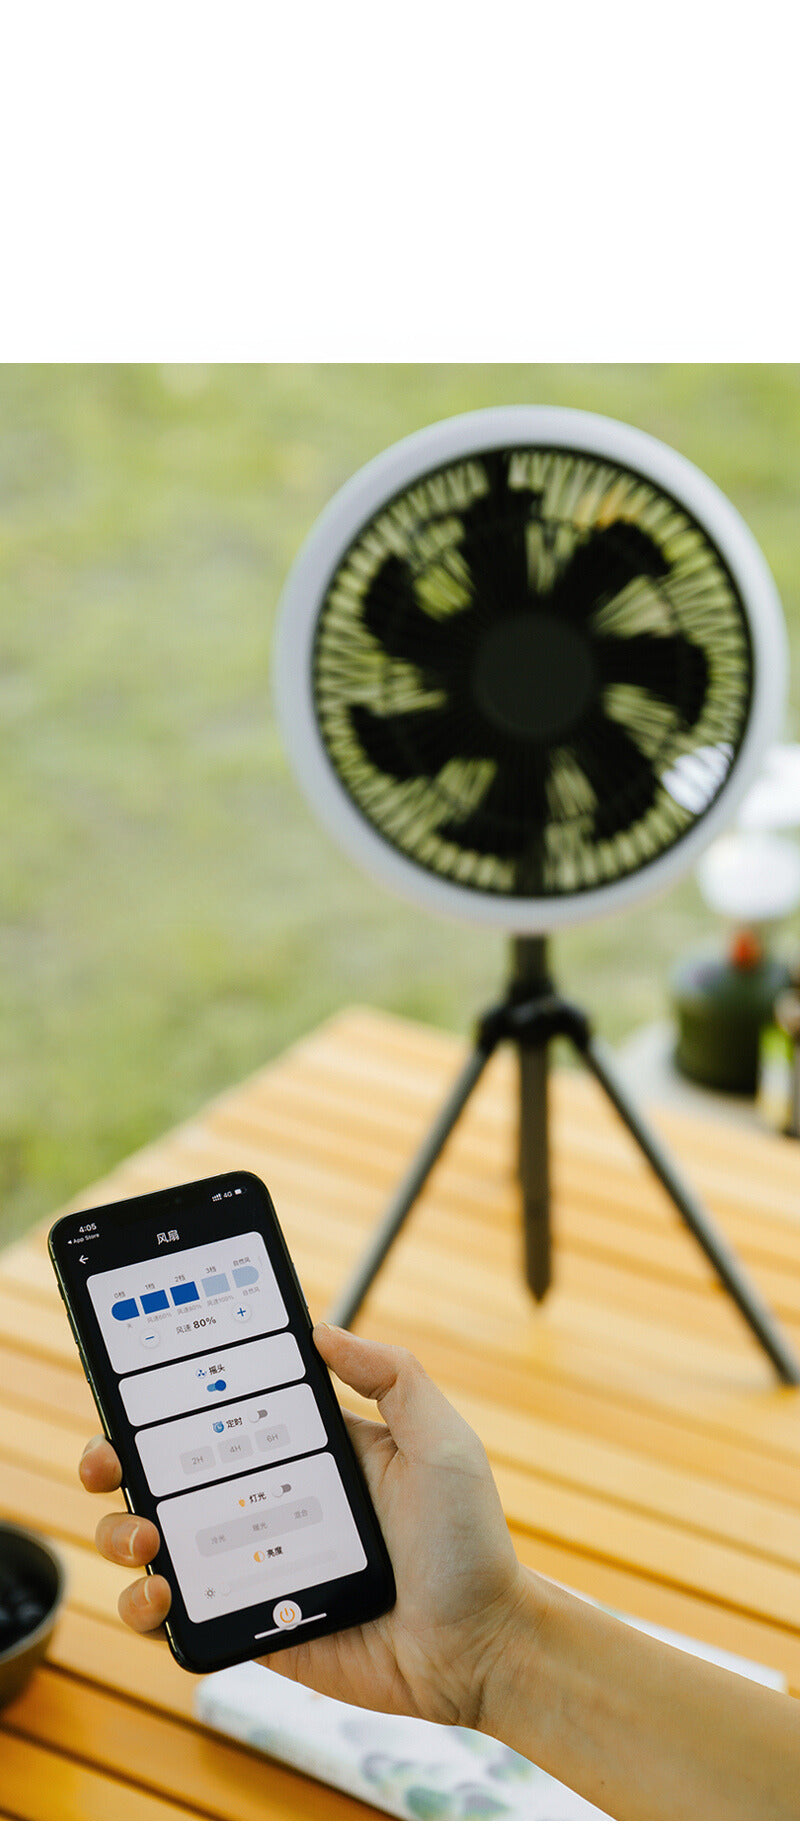 Portable Fan With Light and App Control